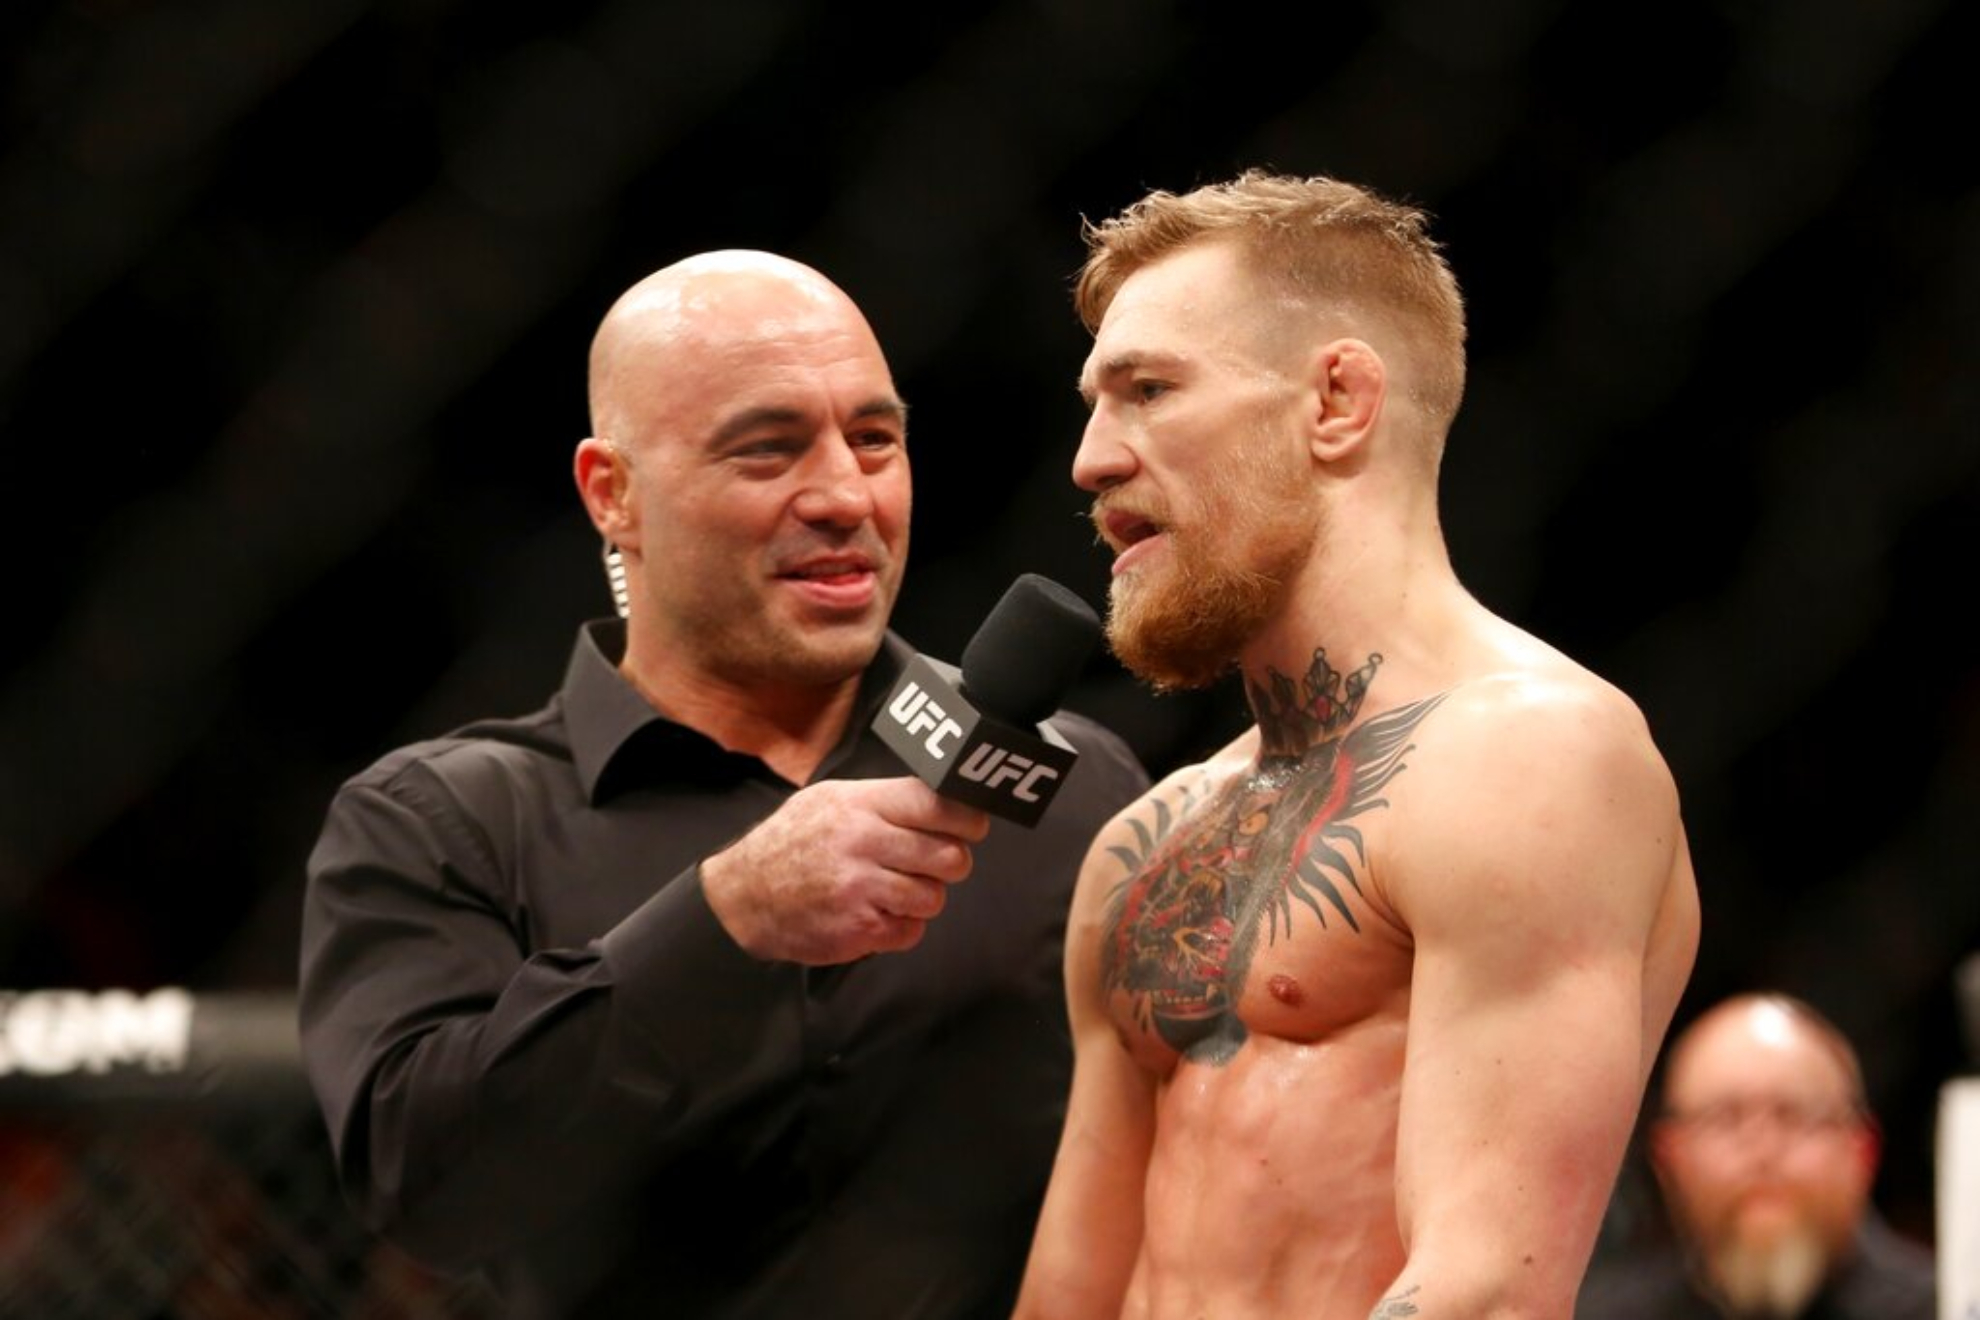 Joe Rogan advocates for athletes to use PDAs in case of injury  Like Conor McGregor did